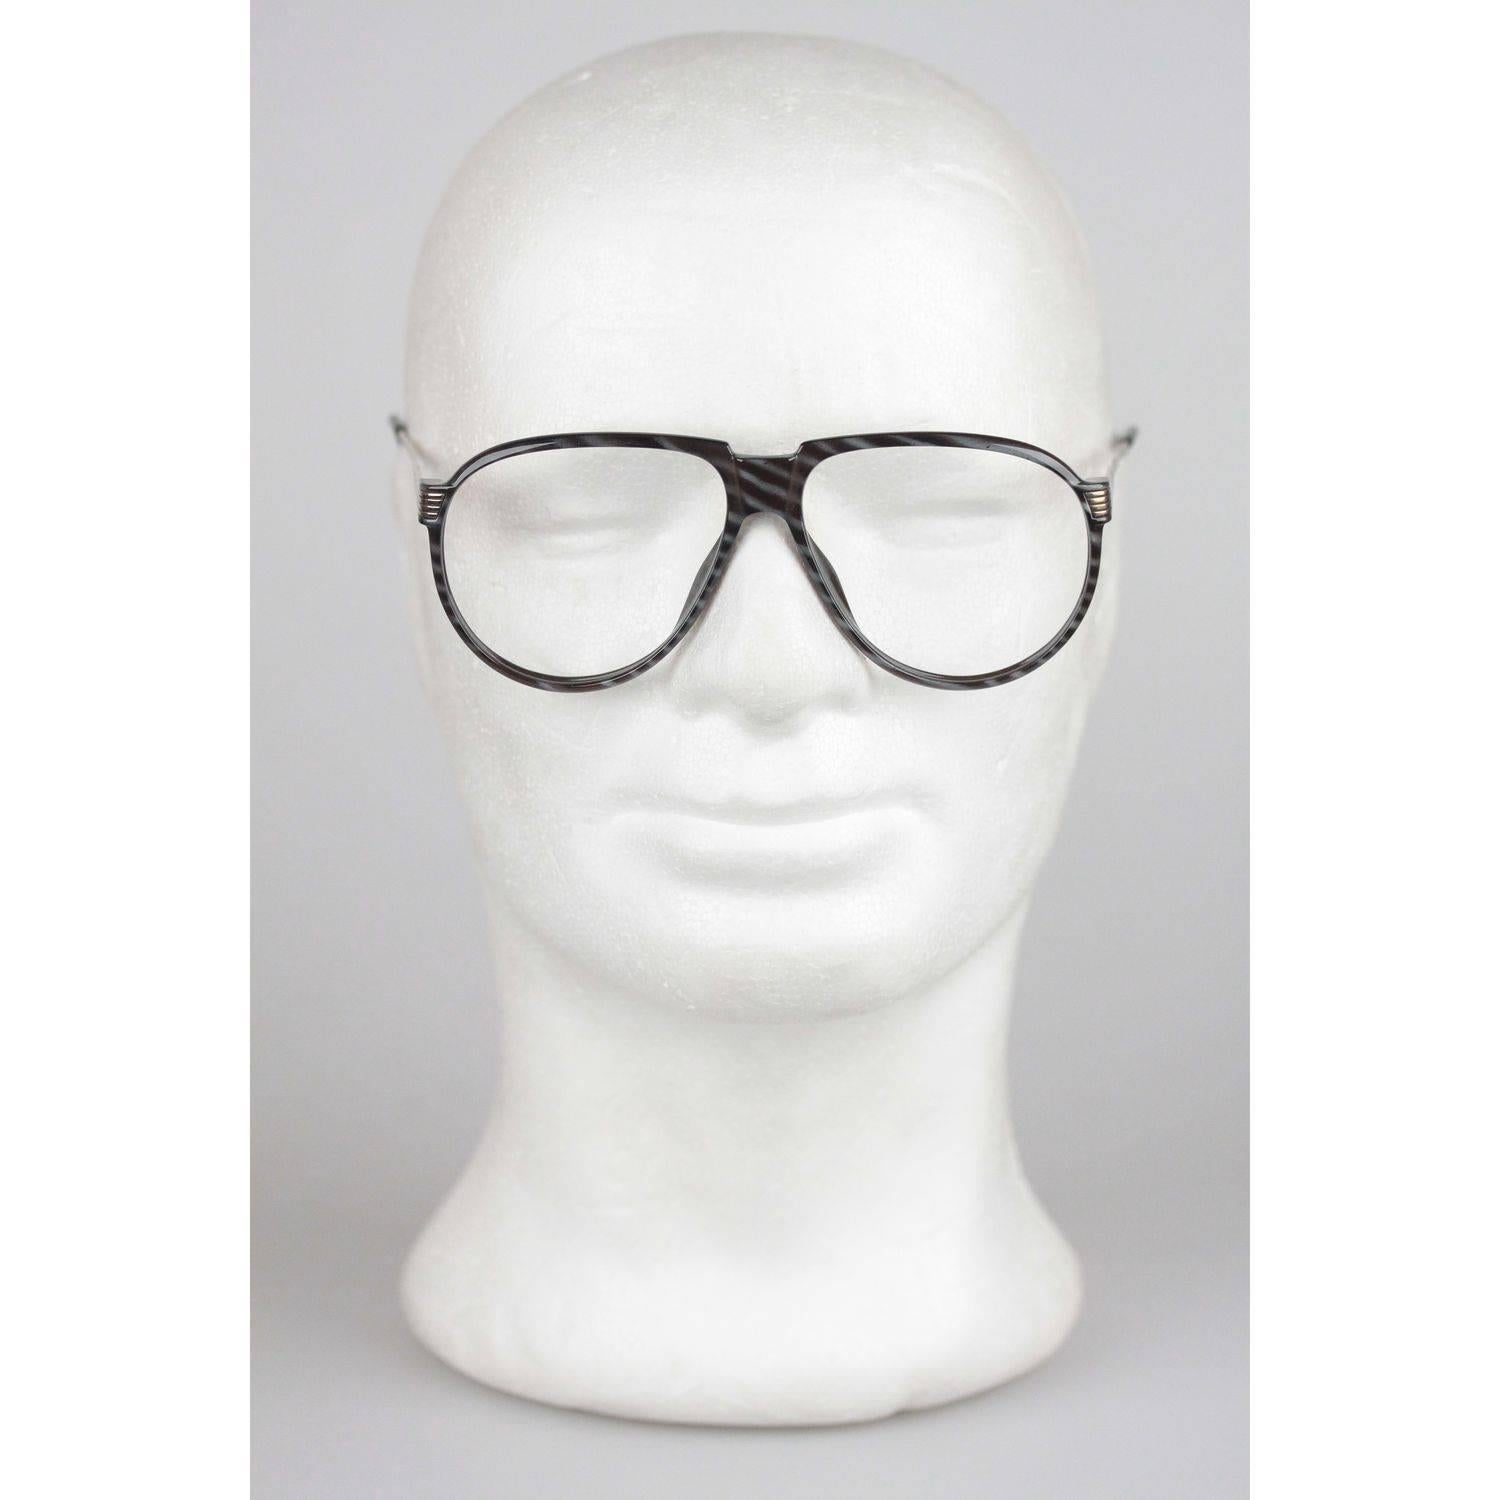 - CHRISTIAN DIOR MONSIEUR eyeglasses, Made in Germany
- Rare 1980s cult vintage frame 
Black & Gray Striped acetate frame, with gold metal arms
NO LENS!
Measurements:
-Temple lenght: 135 mm
- Temple to temple (to the front): 135 mm
- Orbit